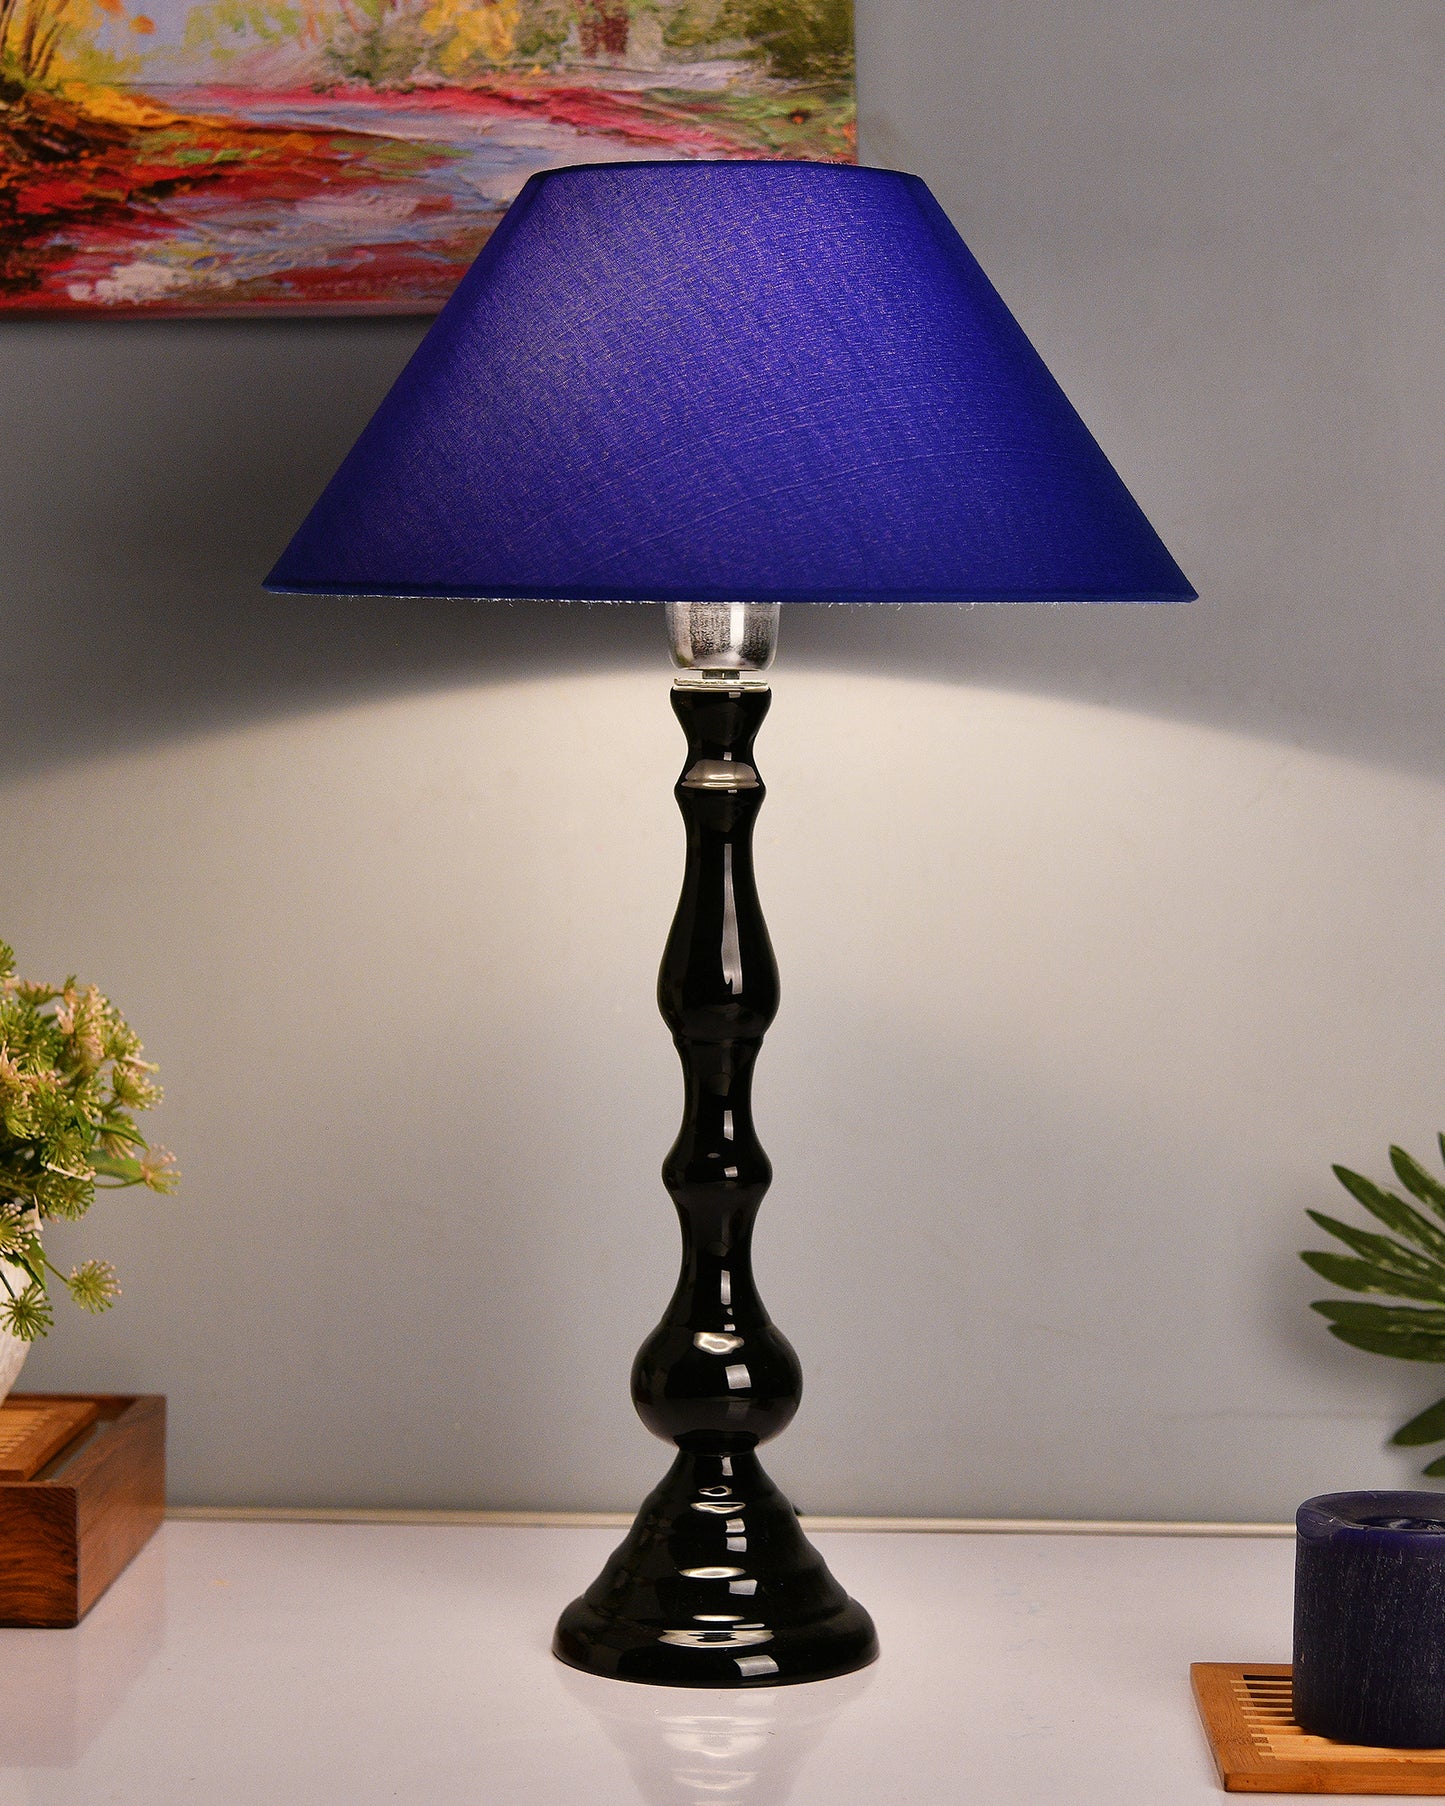 Glossy Black Teardrop Aluminium Table Lamp With Cone Shade, Bedside, Living Room Study Lamp, Bulb Included